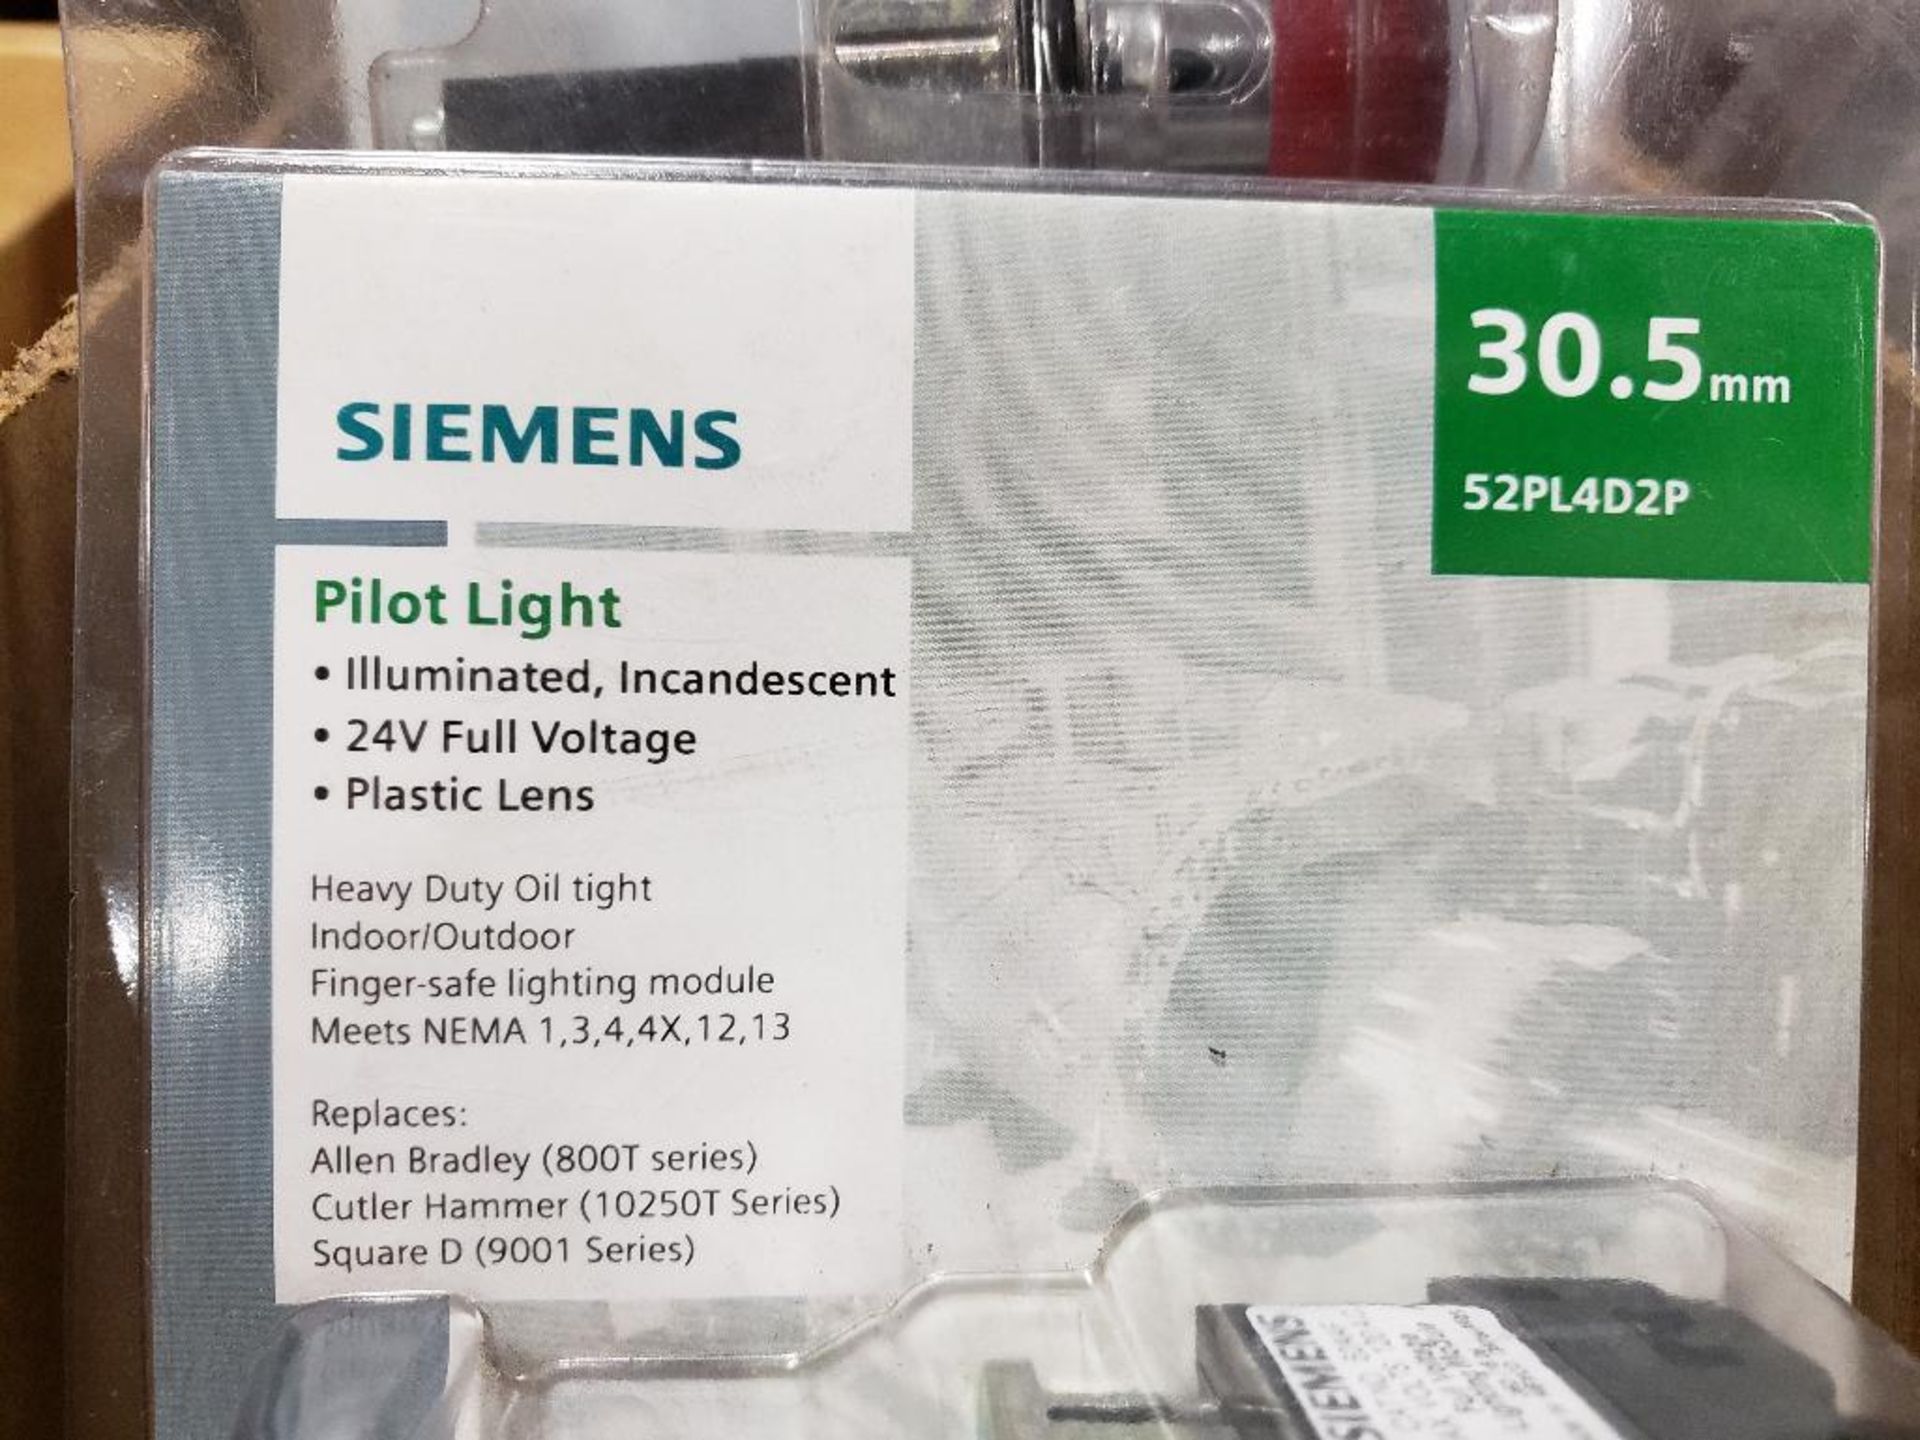 Qty 4 - Siemens pilot light. Part number 52PL4D2P. New in package. - Image 3 of 3